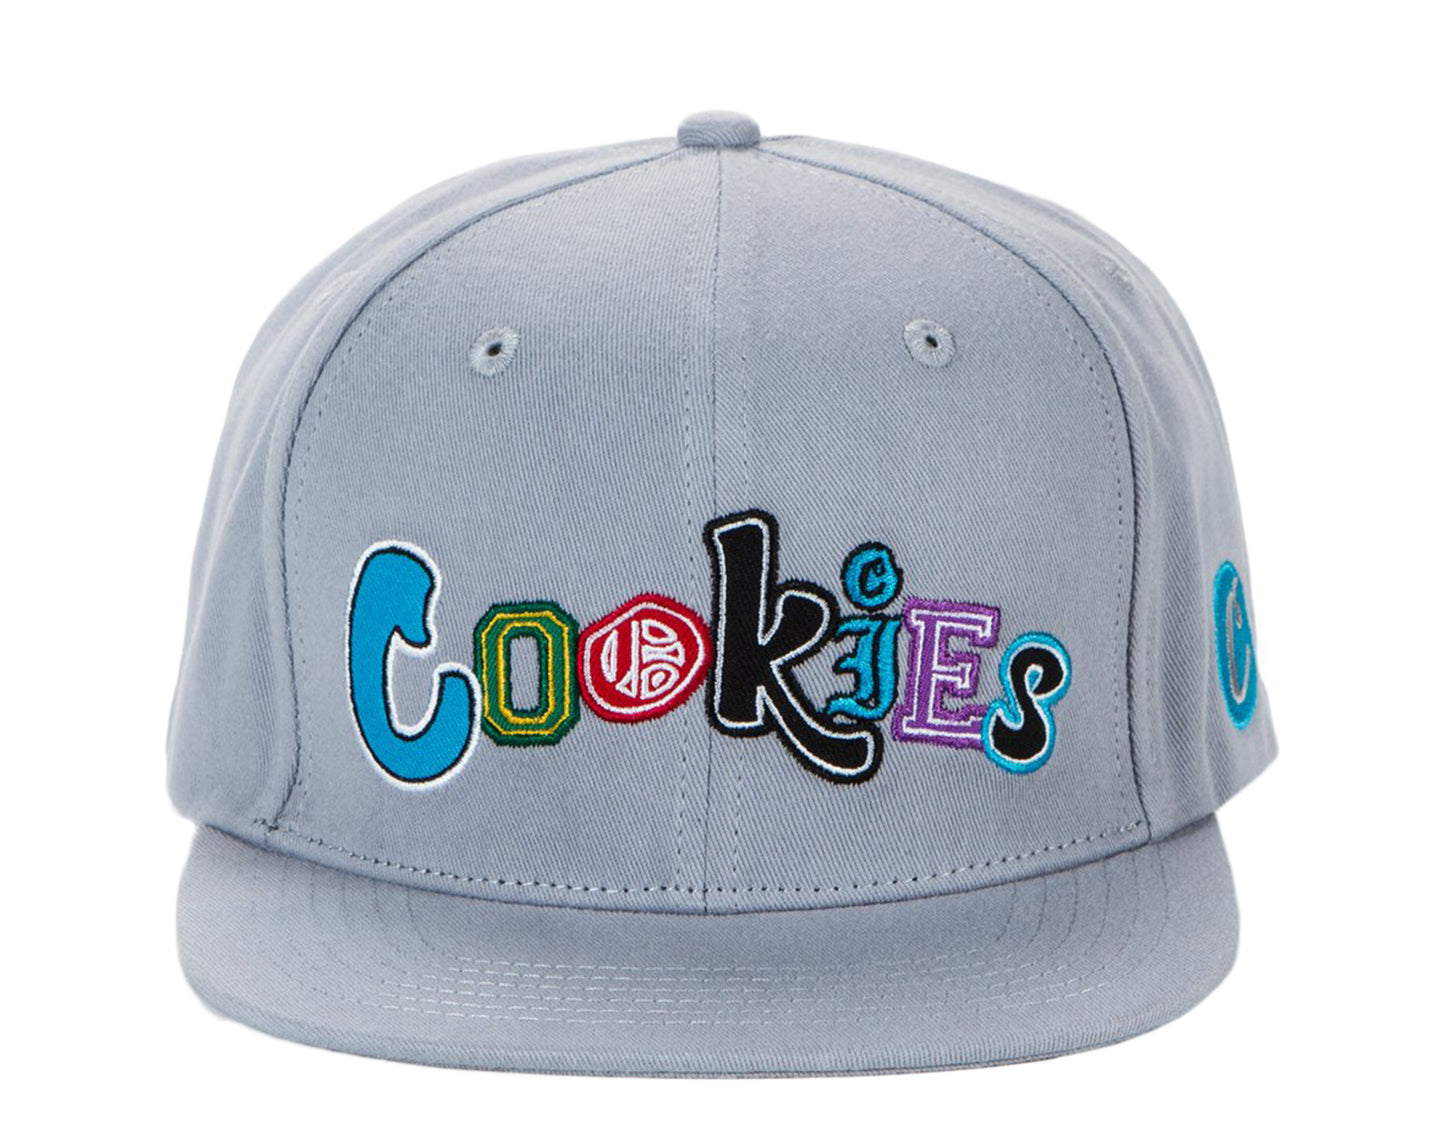 Cookies City Limits Multi-Color Lettering Twill Snapback Grey Hat 1545X4118-HGY